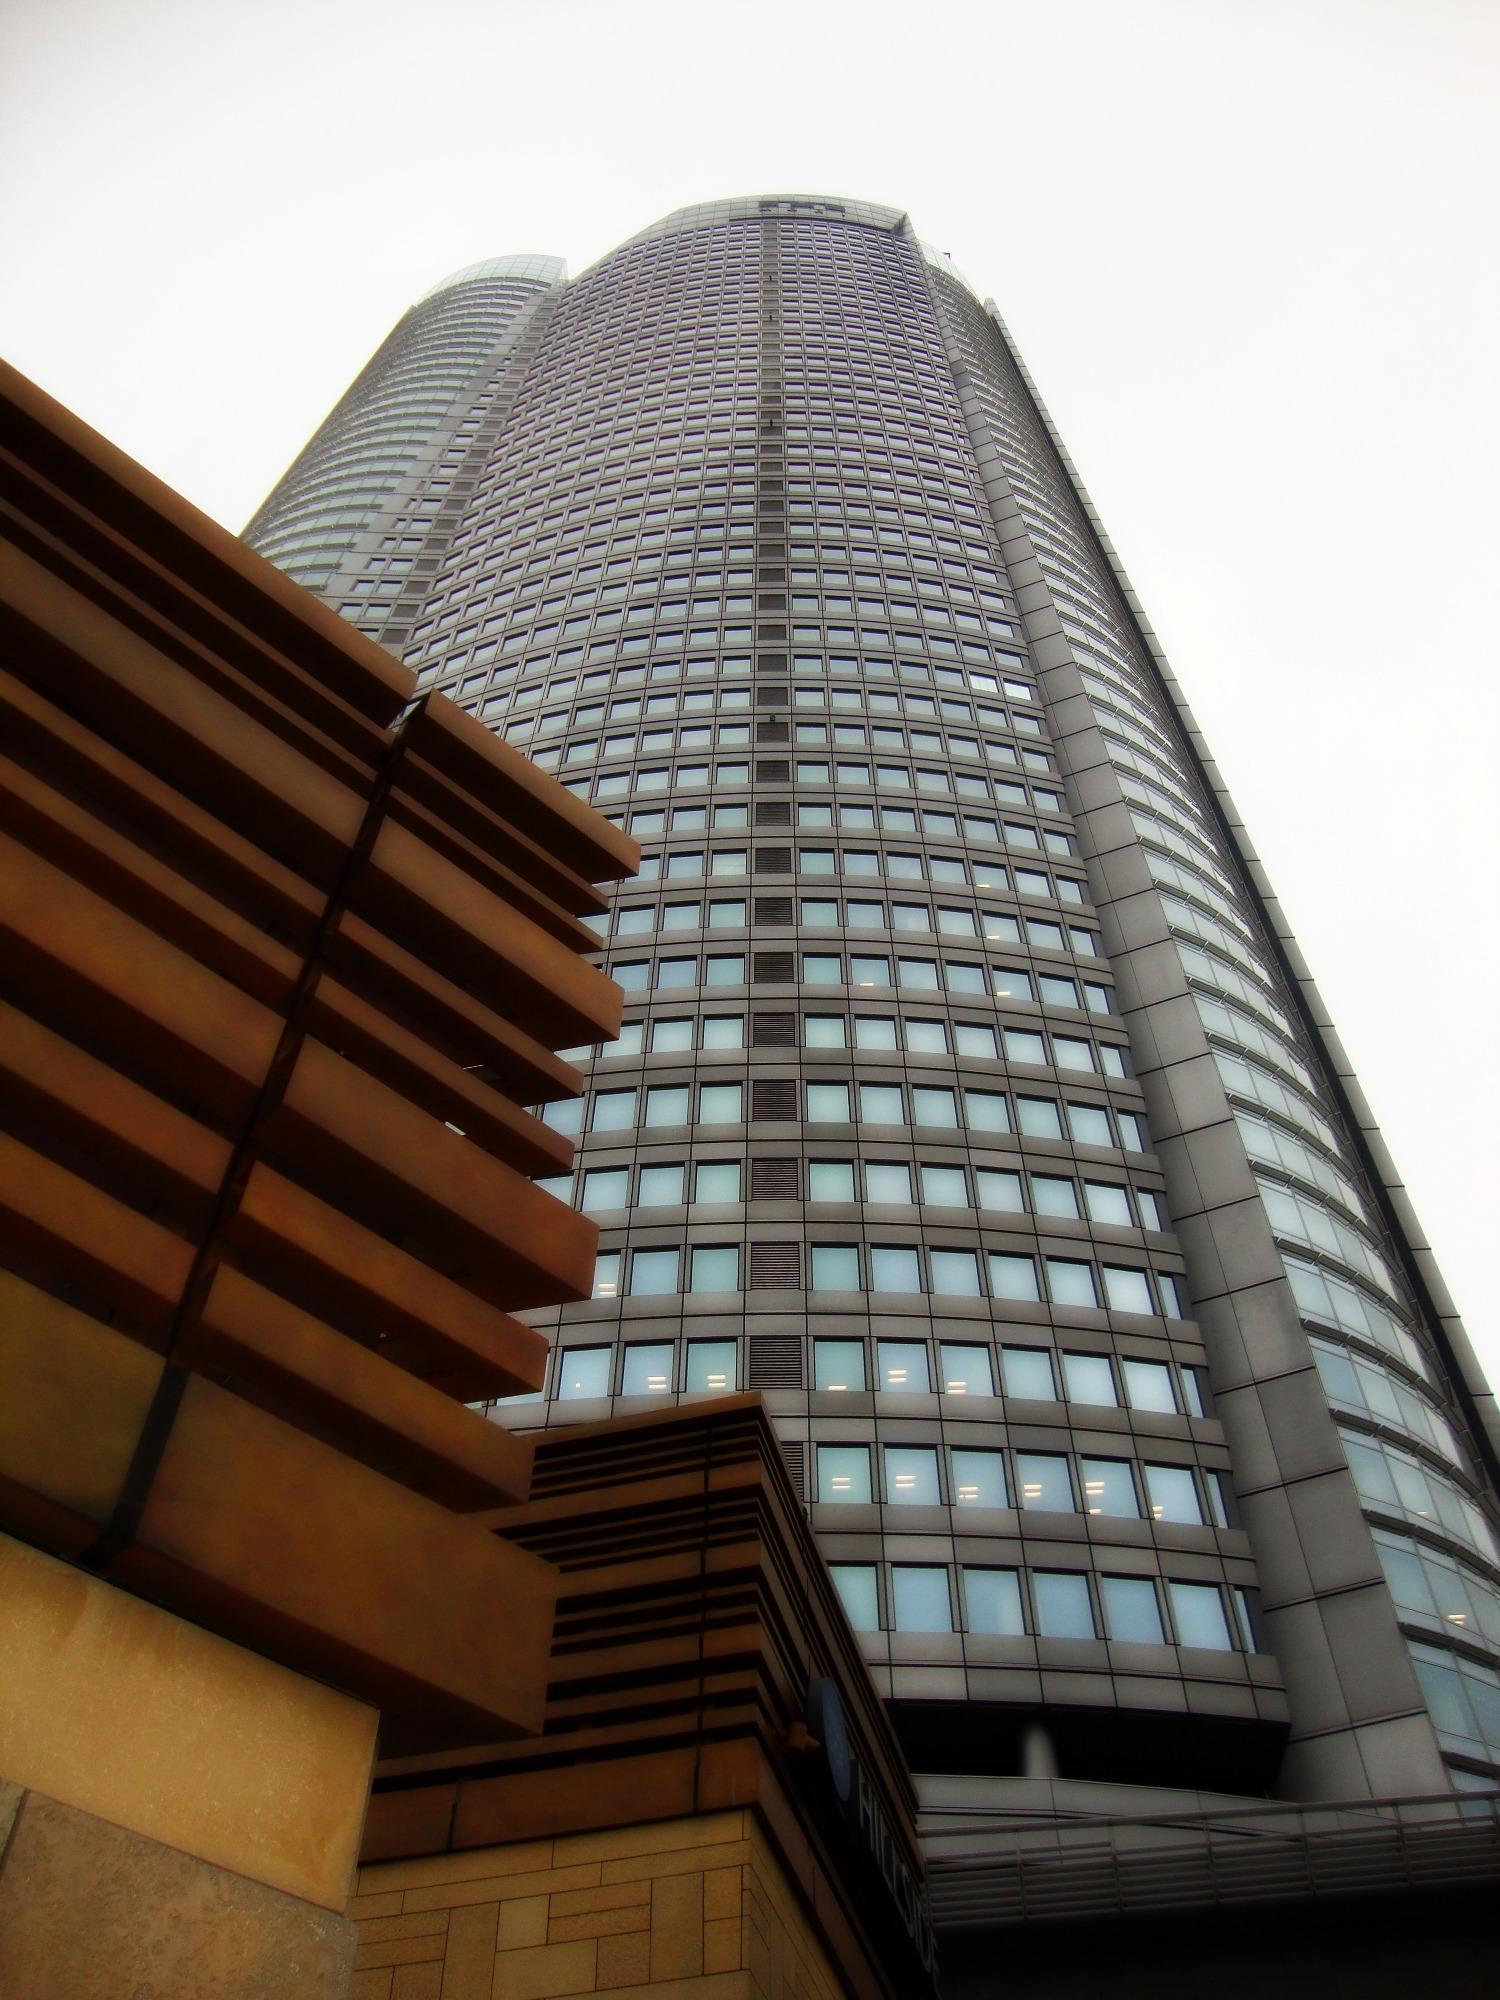 Photo of Mori Tower in the Roppongi Hills complex. For a great view of Tokyo, go to the top floor of the observatory. #Tokyo travel guide.